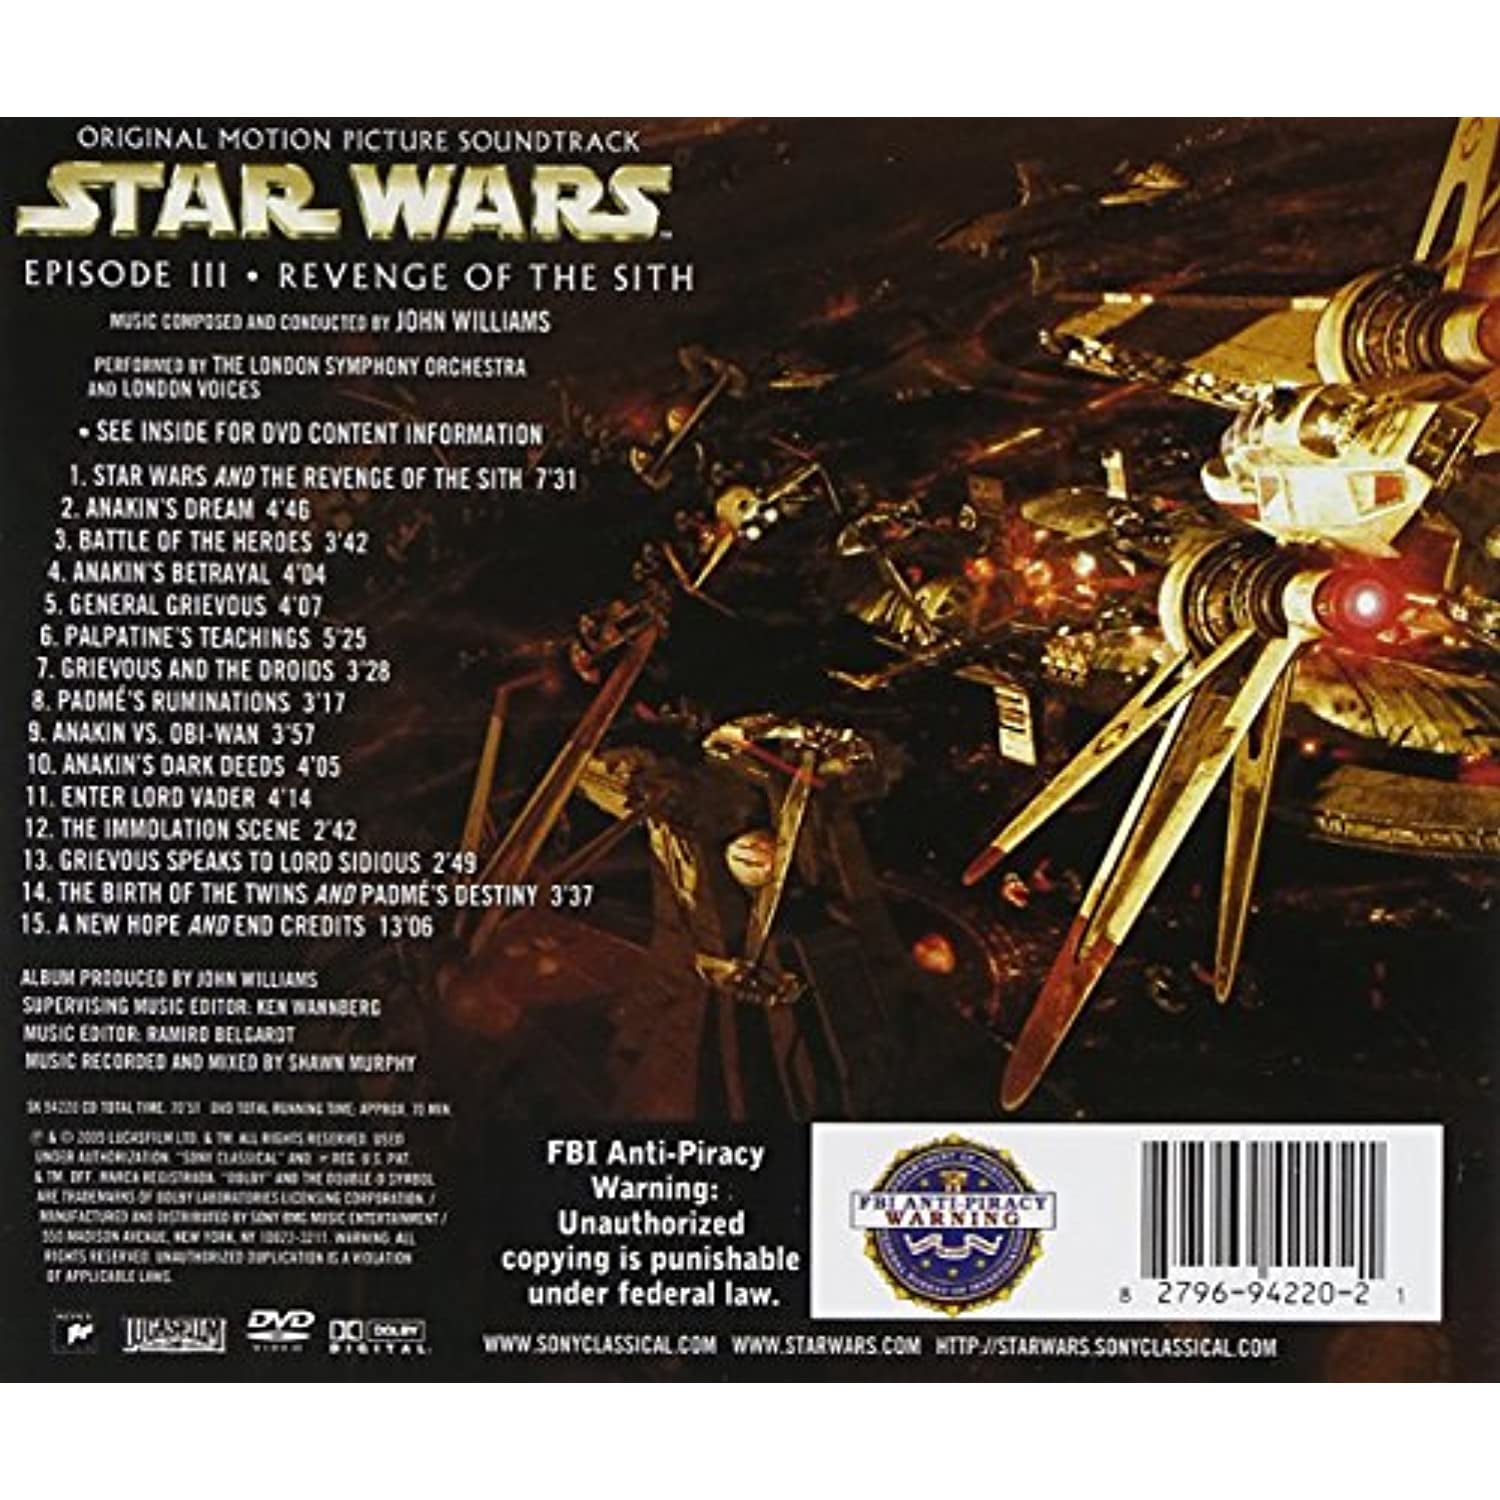 Star Wars: Episode III Revenge Of The Sith (Complete Motion Picture Score)  — John Williams